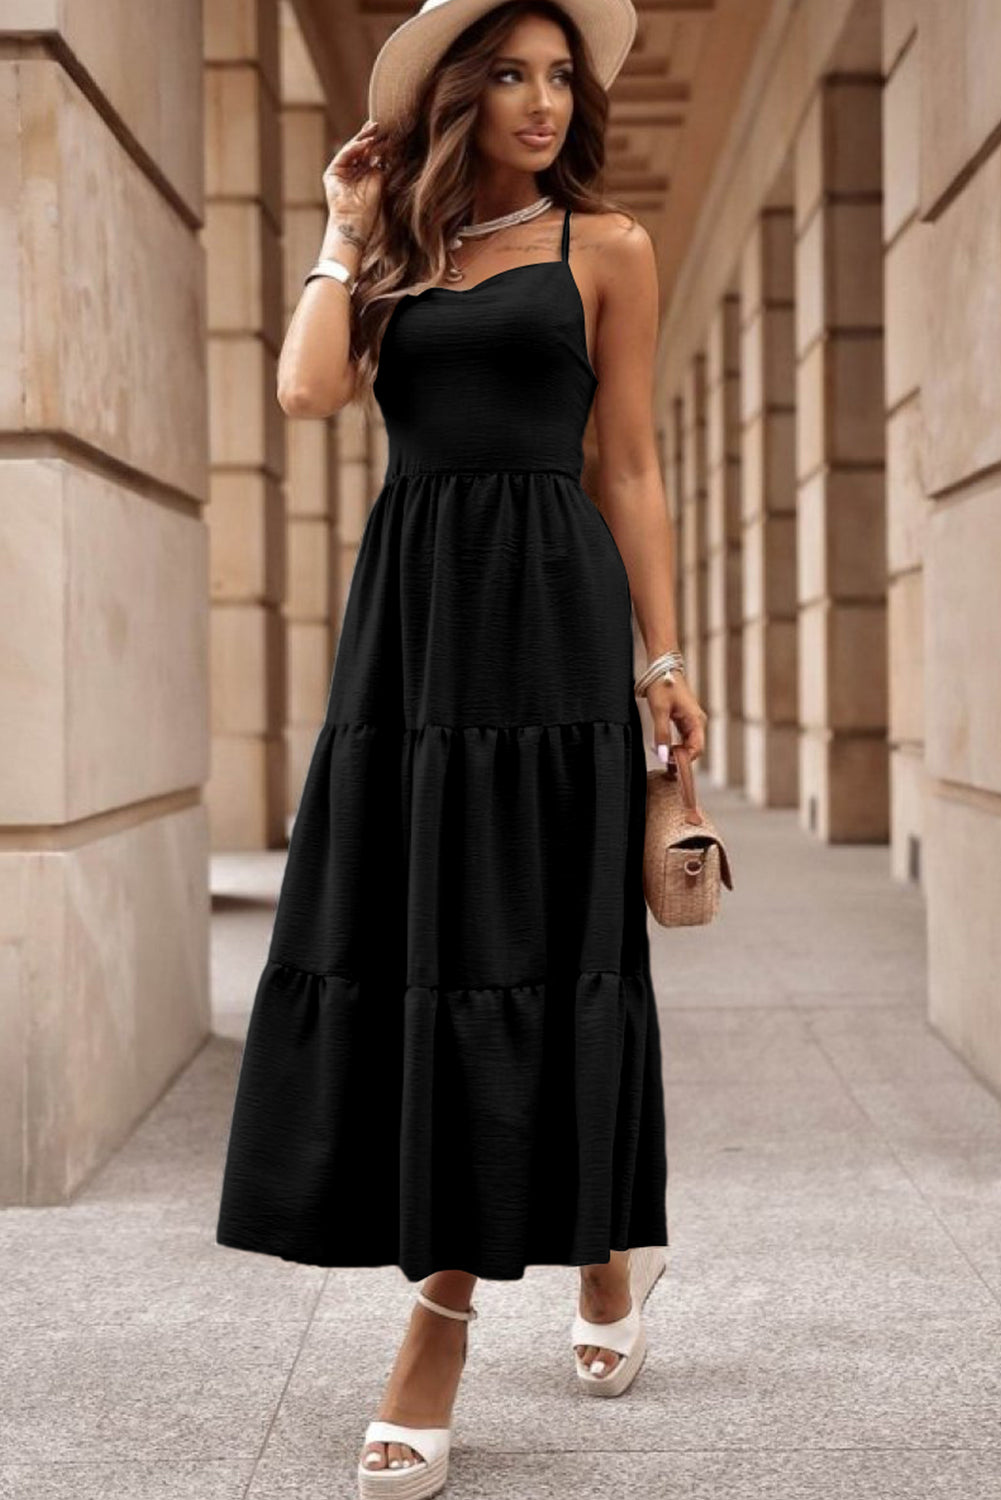 Black Crossover Backless Bodice Tiered Maxi Dress